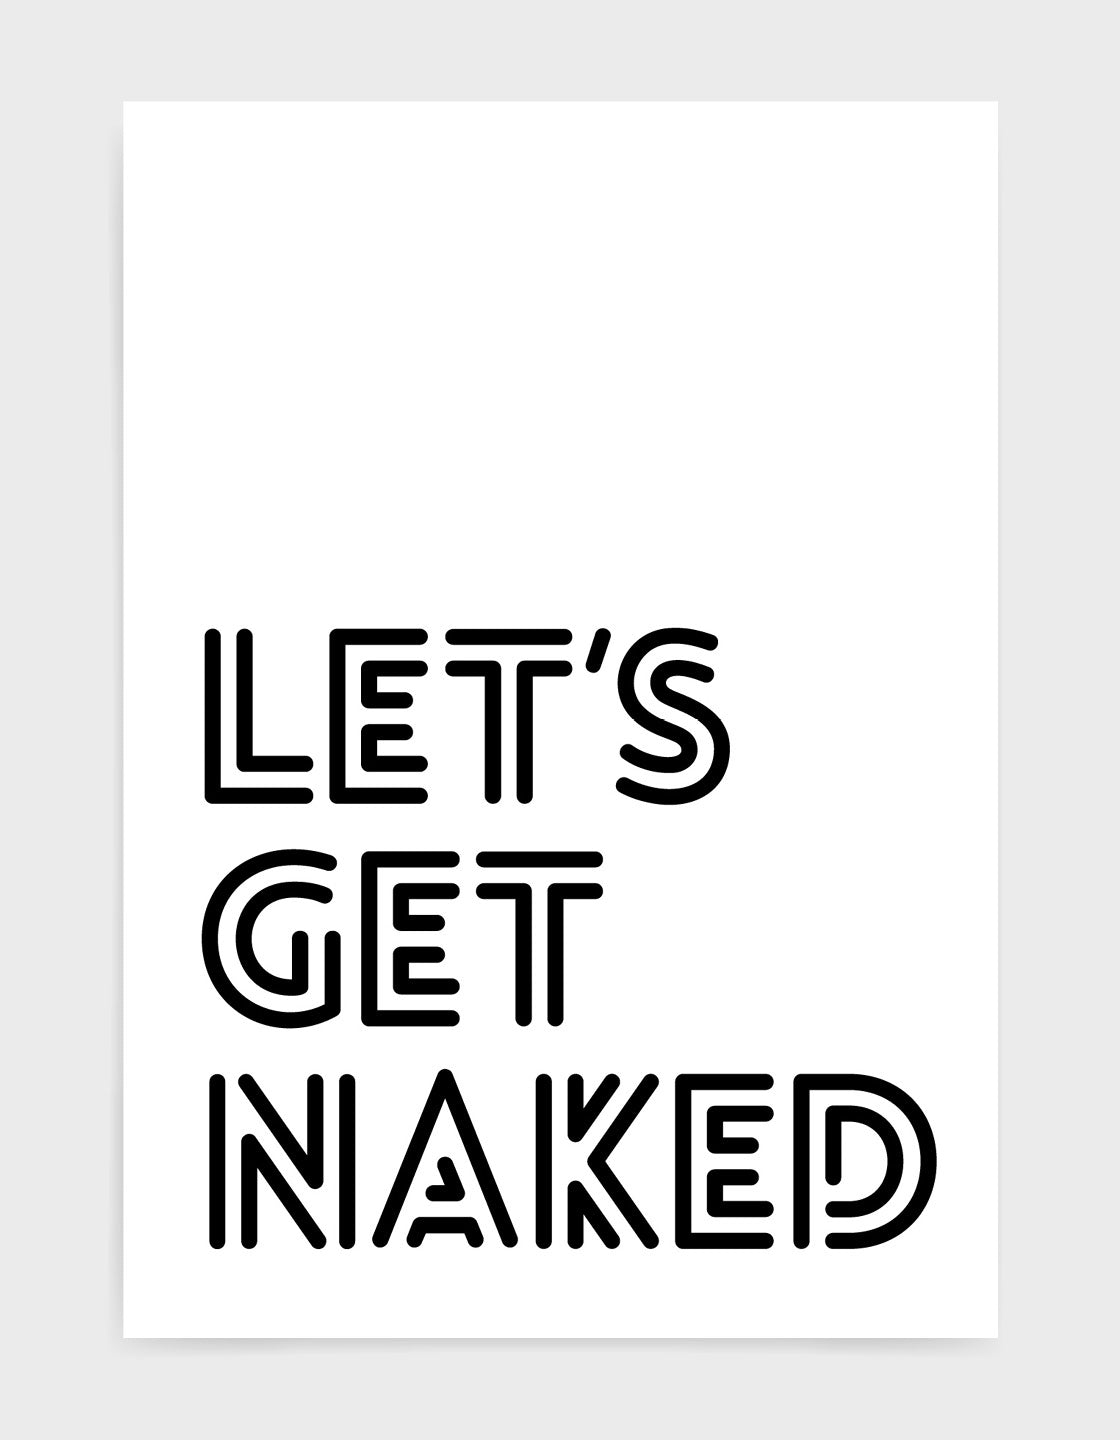 typography art print with lets get naked in black against a white background